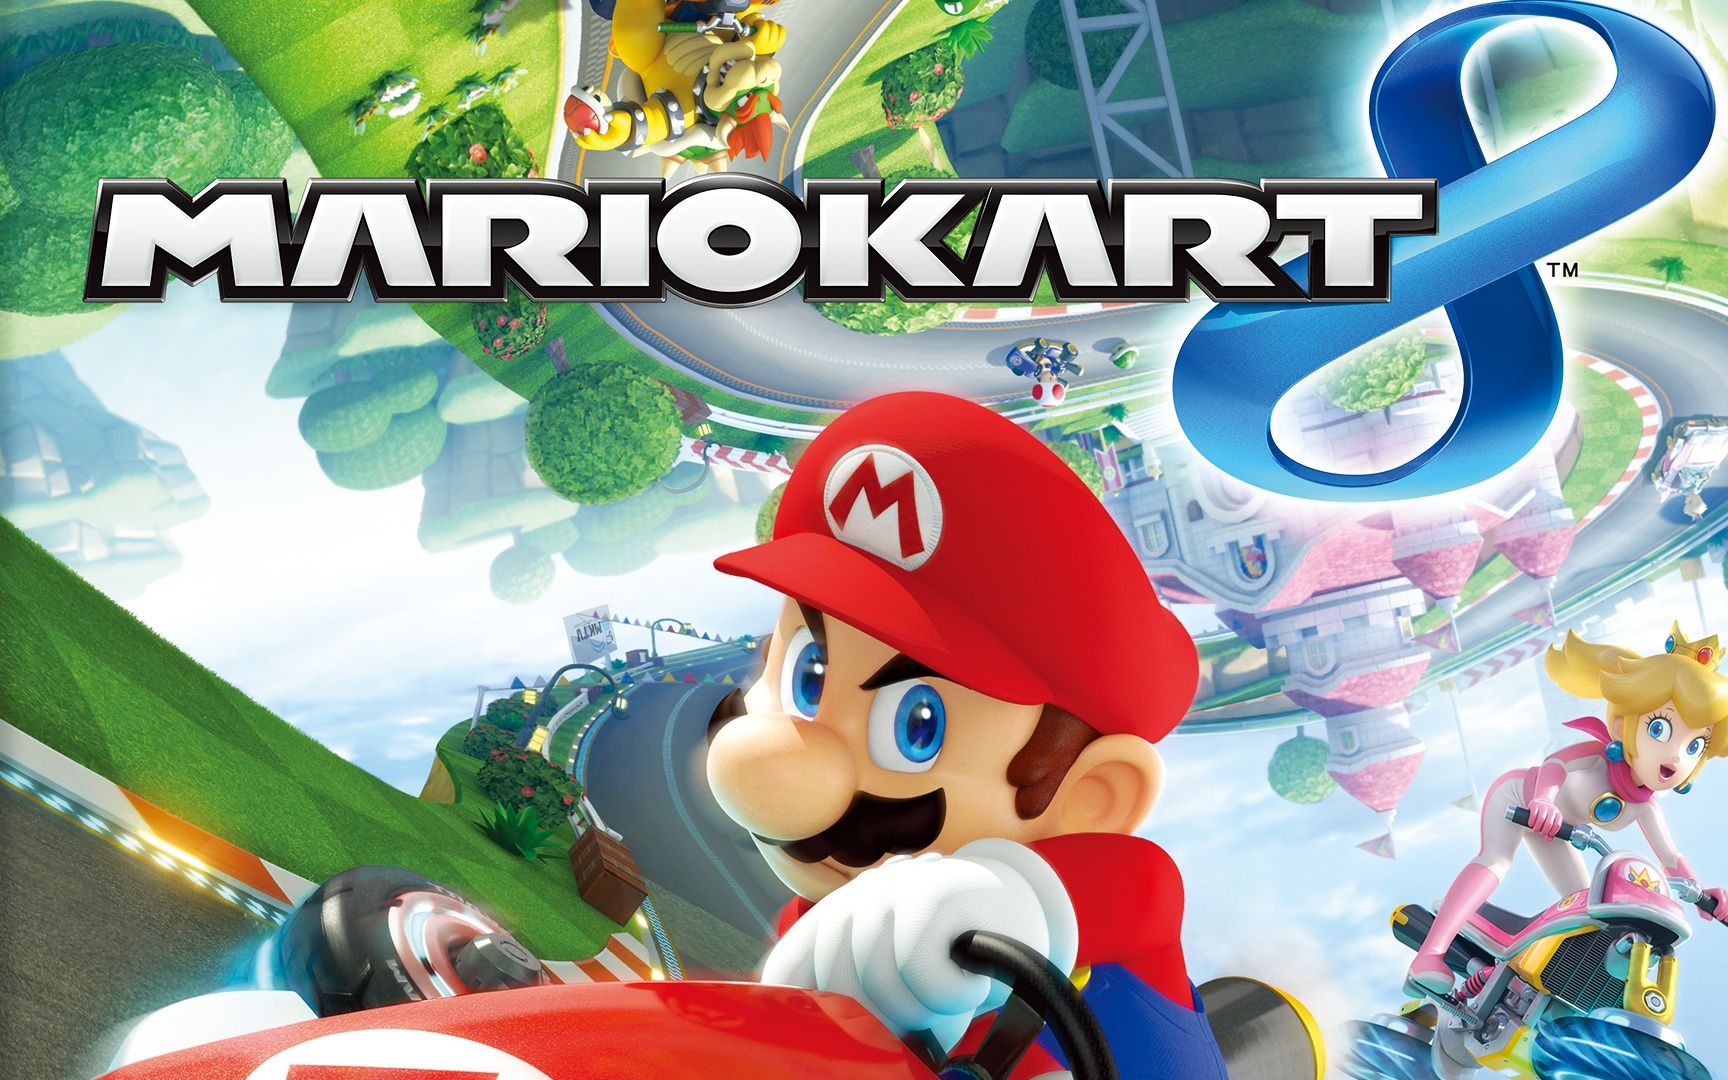 New Mario Kart 8 Features Revealed Via a Trailer and Screens ...